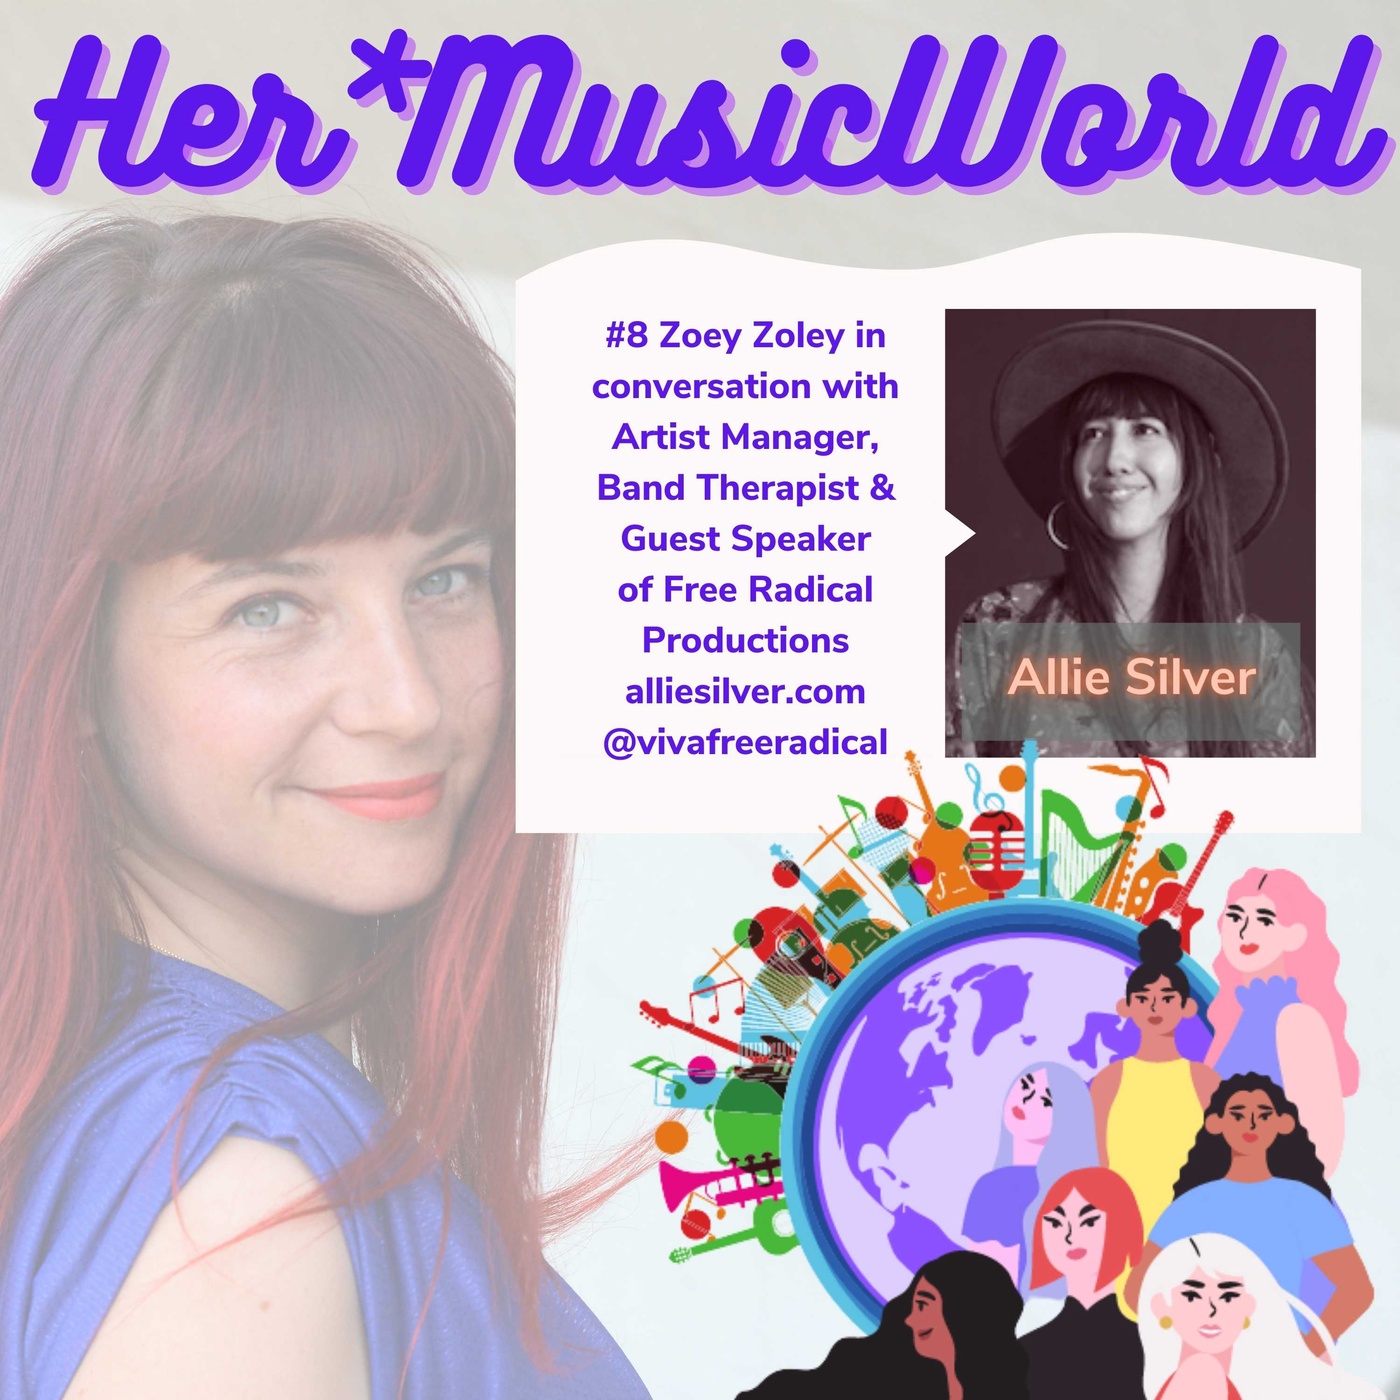 #8 HerMusicWorld Podcast with Allie Silver of Free Radical Productions